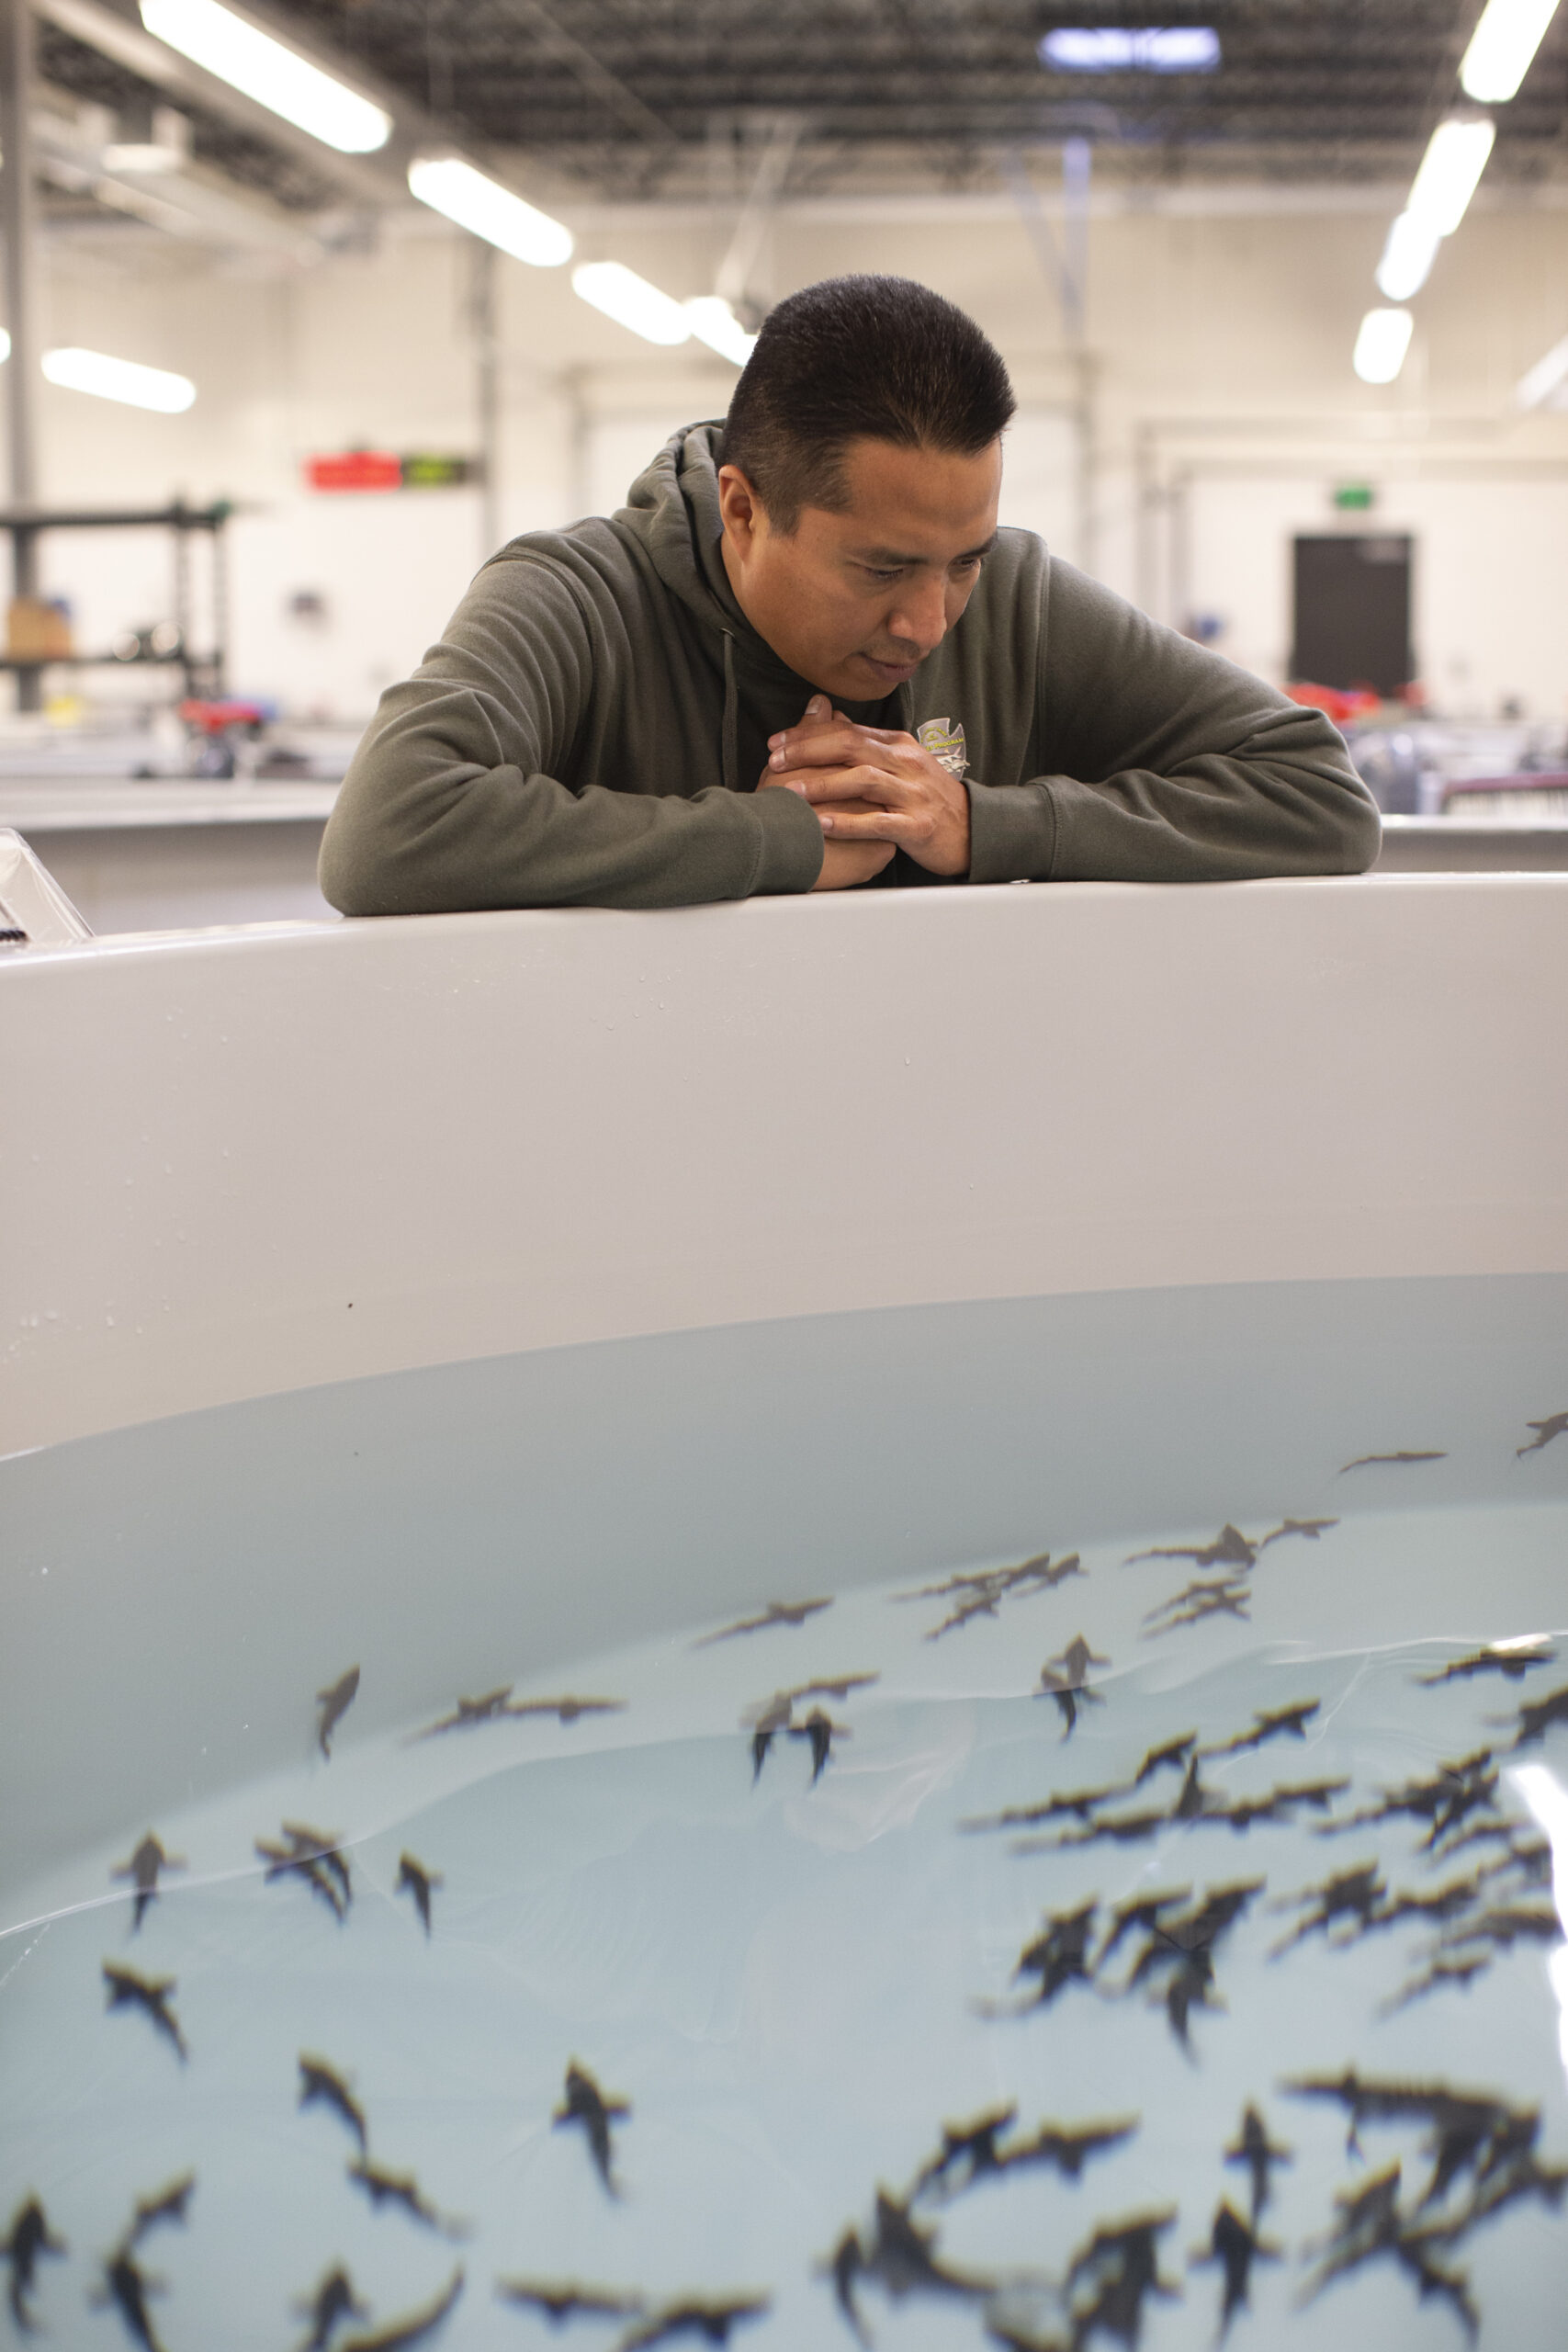 A man looks into a water-filled tank holding baby sturgeon fish